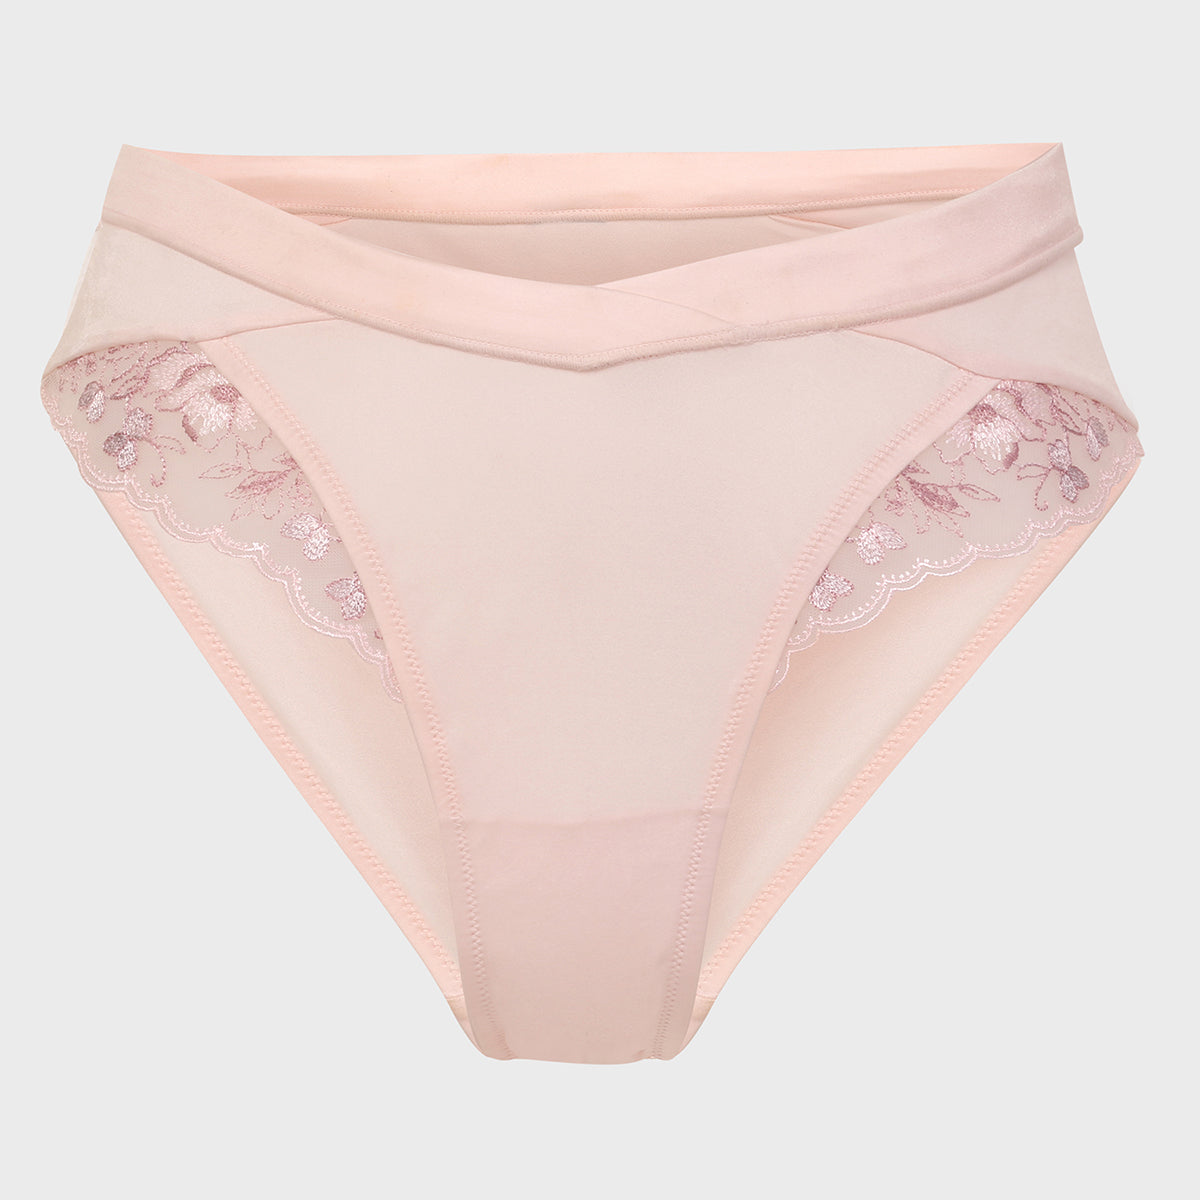 V Cut Floral Lace Hipsters-NYP361-Pink